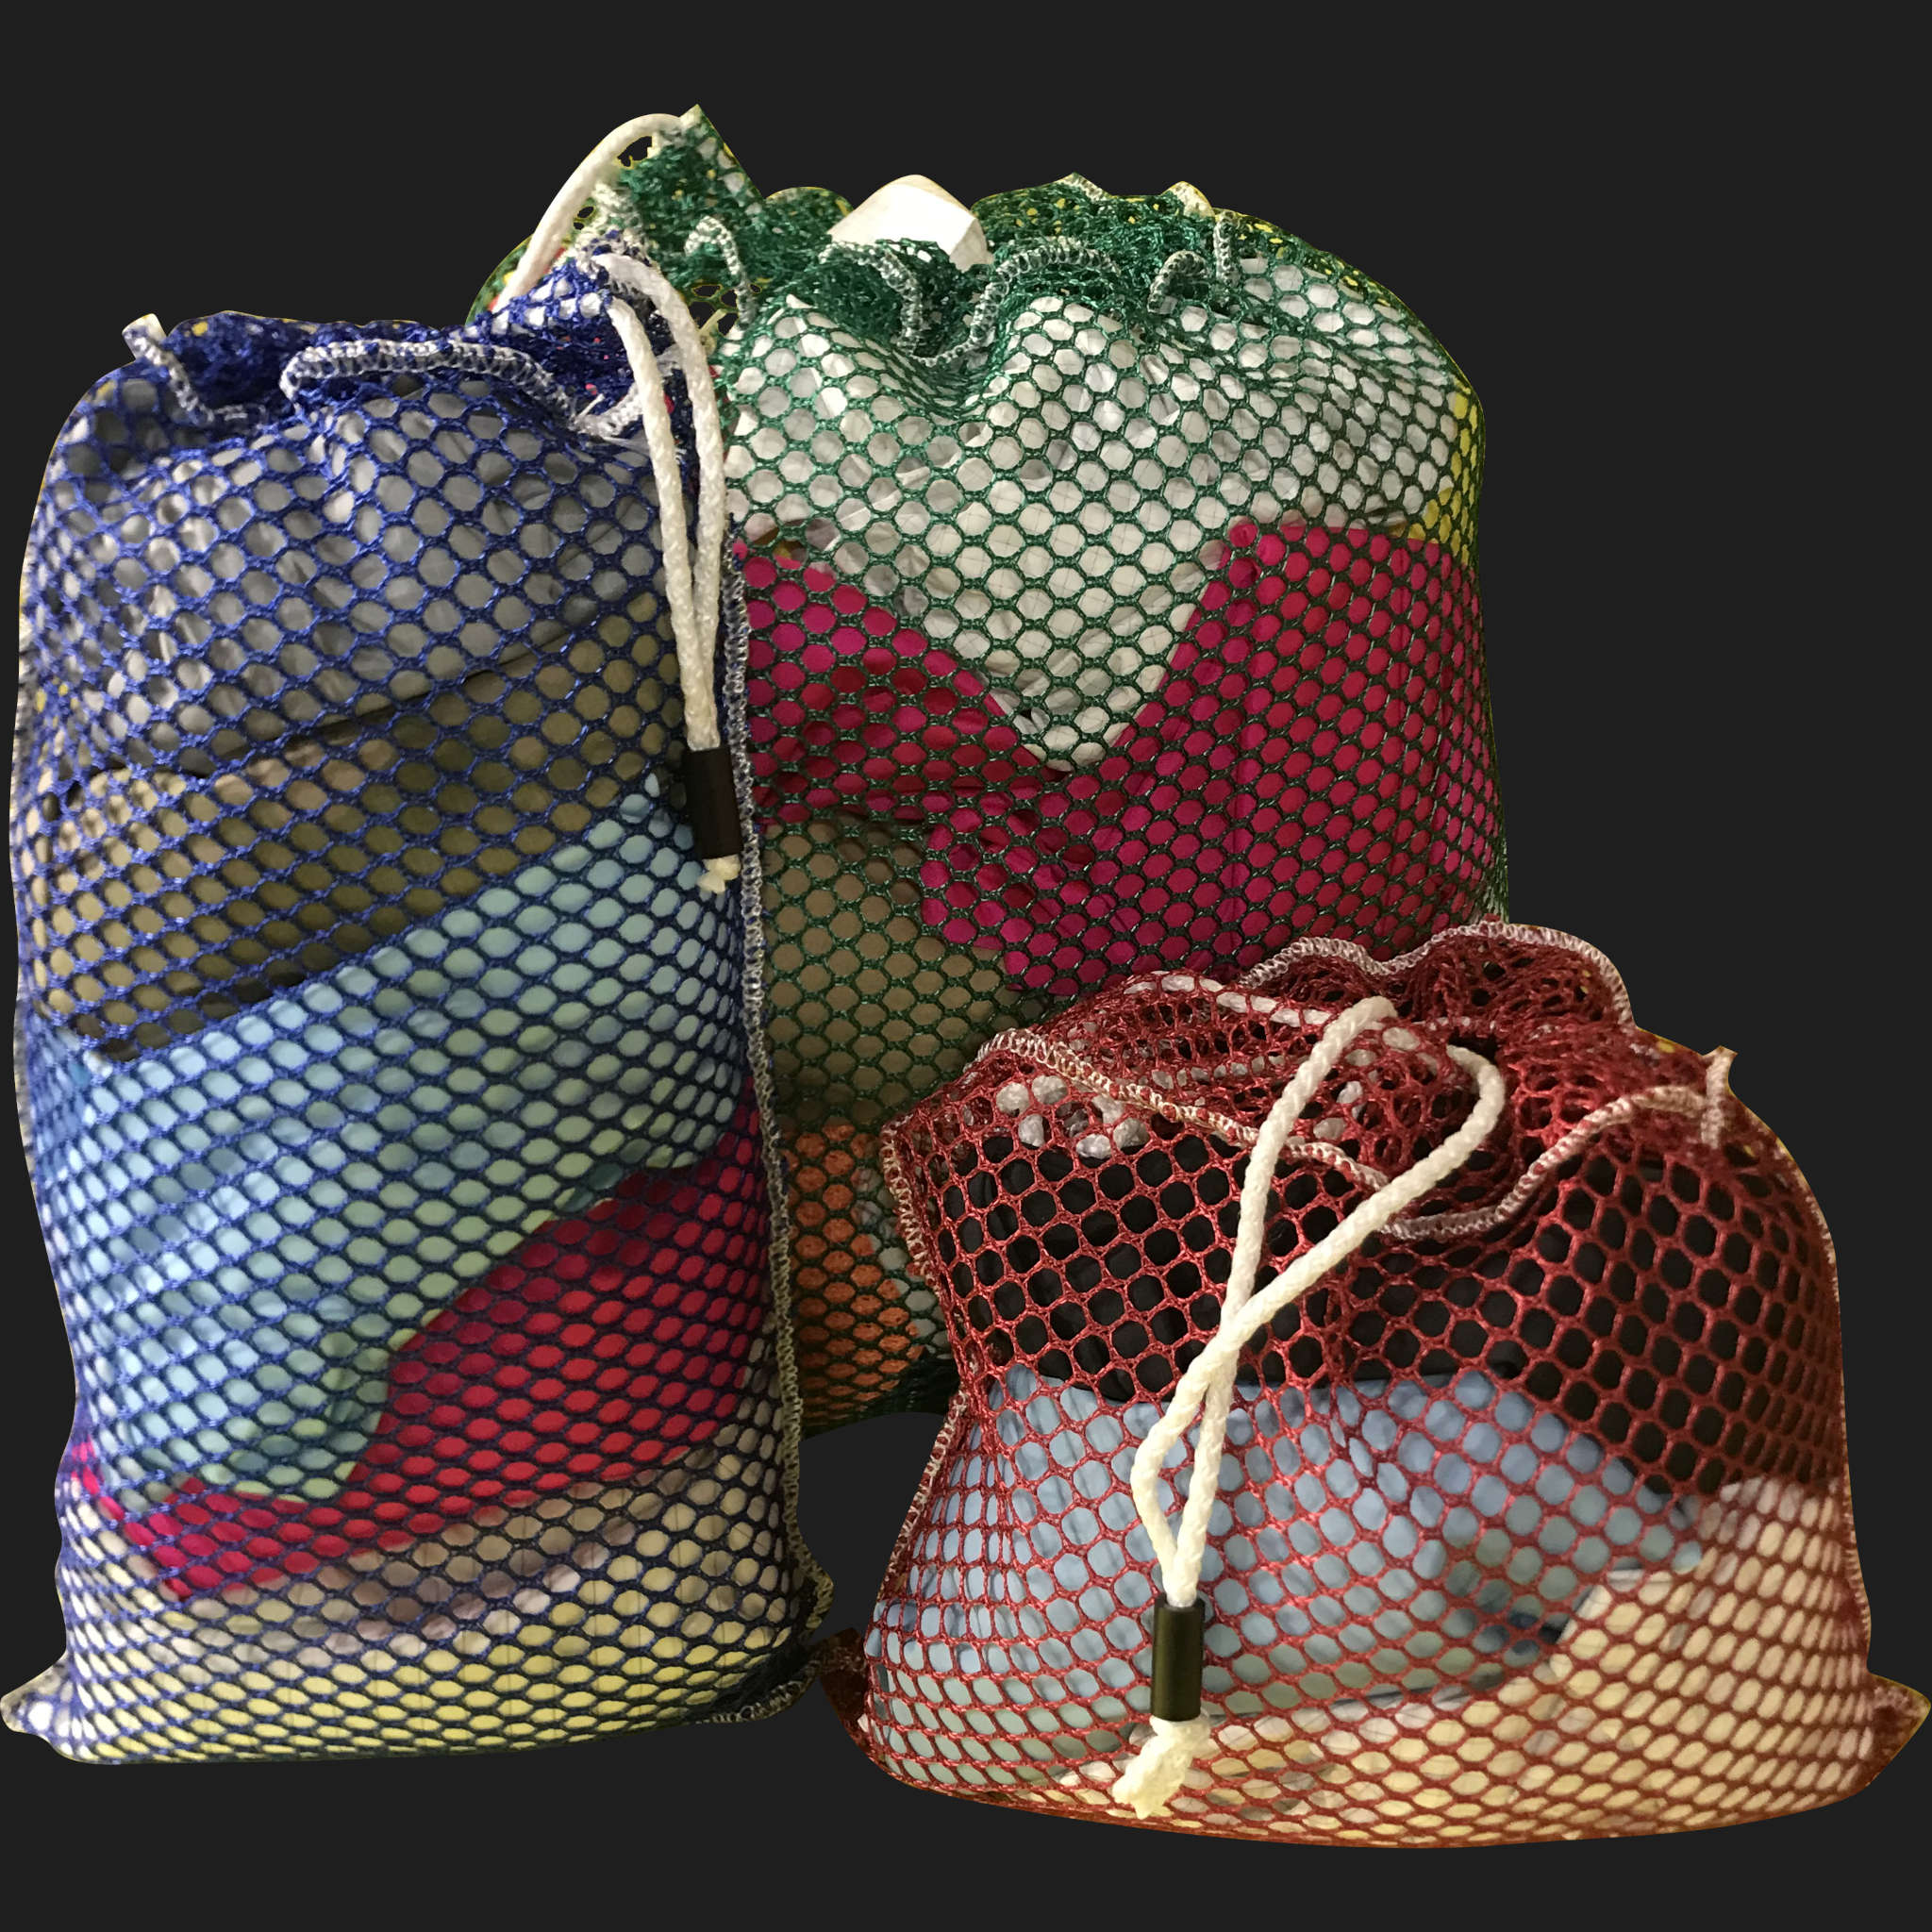 32" x 36" Customized Mesh-Net-Laundry Bags Heavy Duty with Cord and barrellock closure